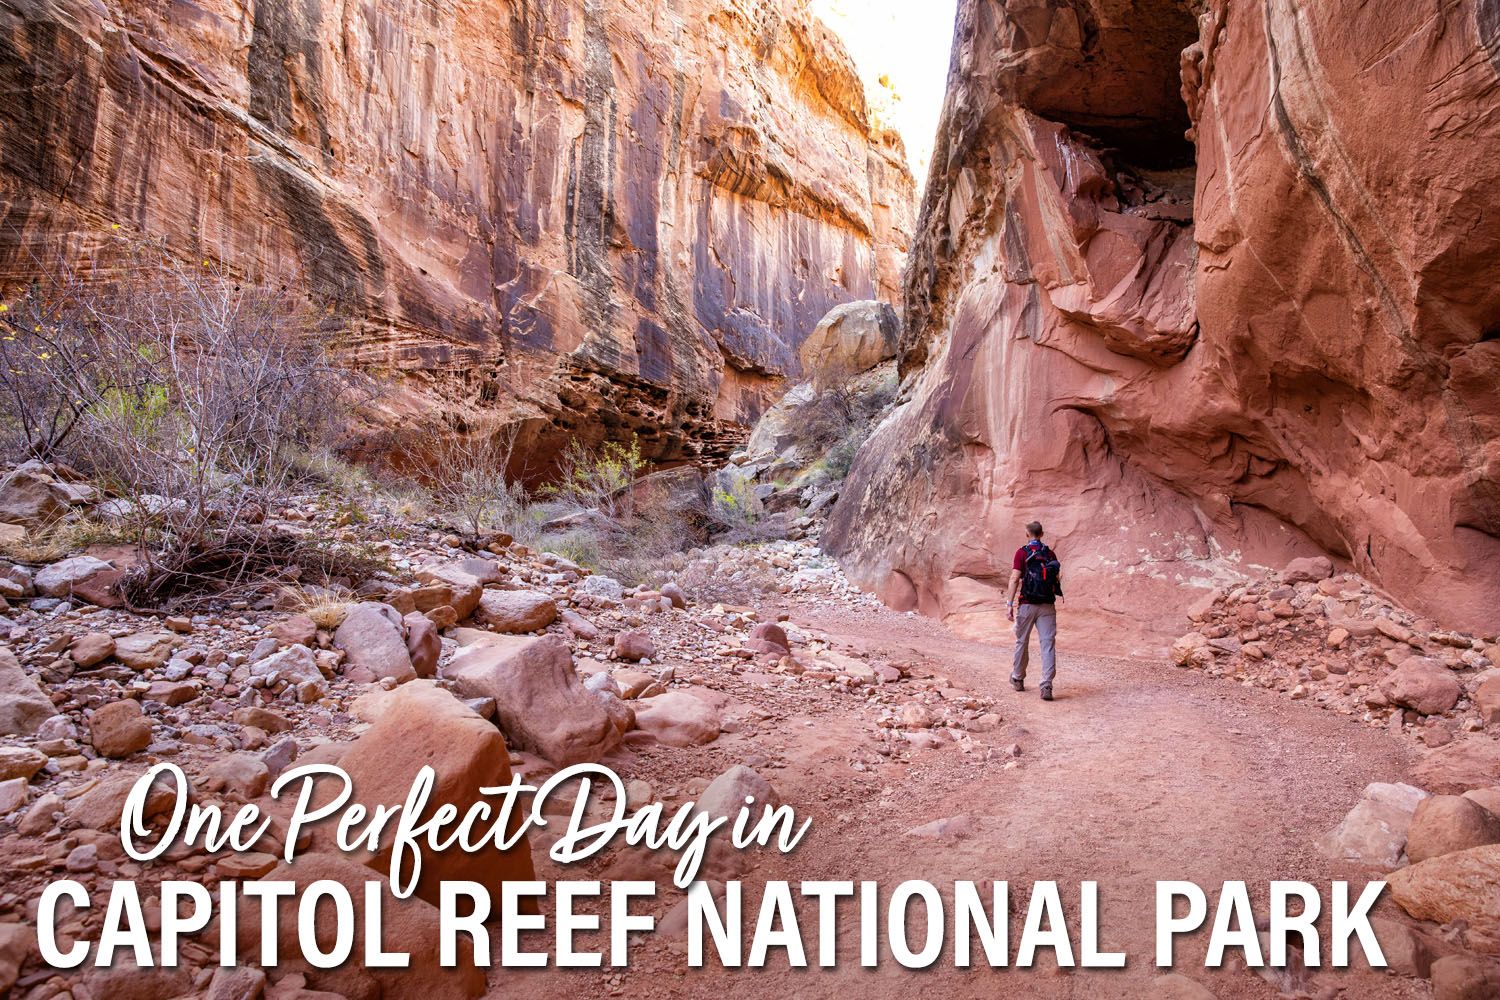 One Day in Capitol Reef